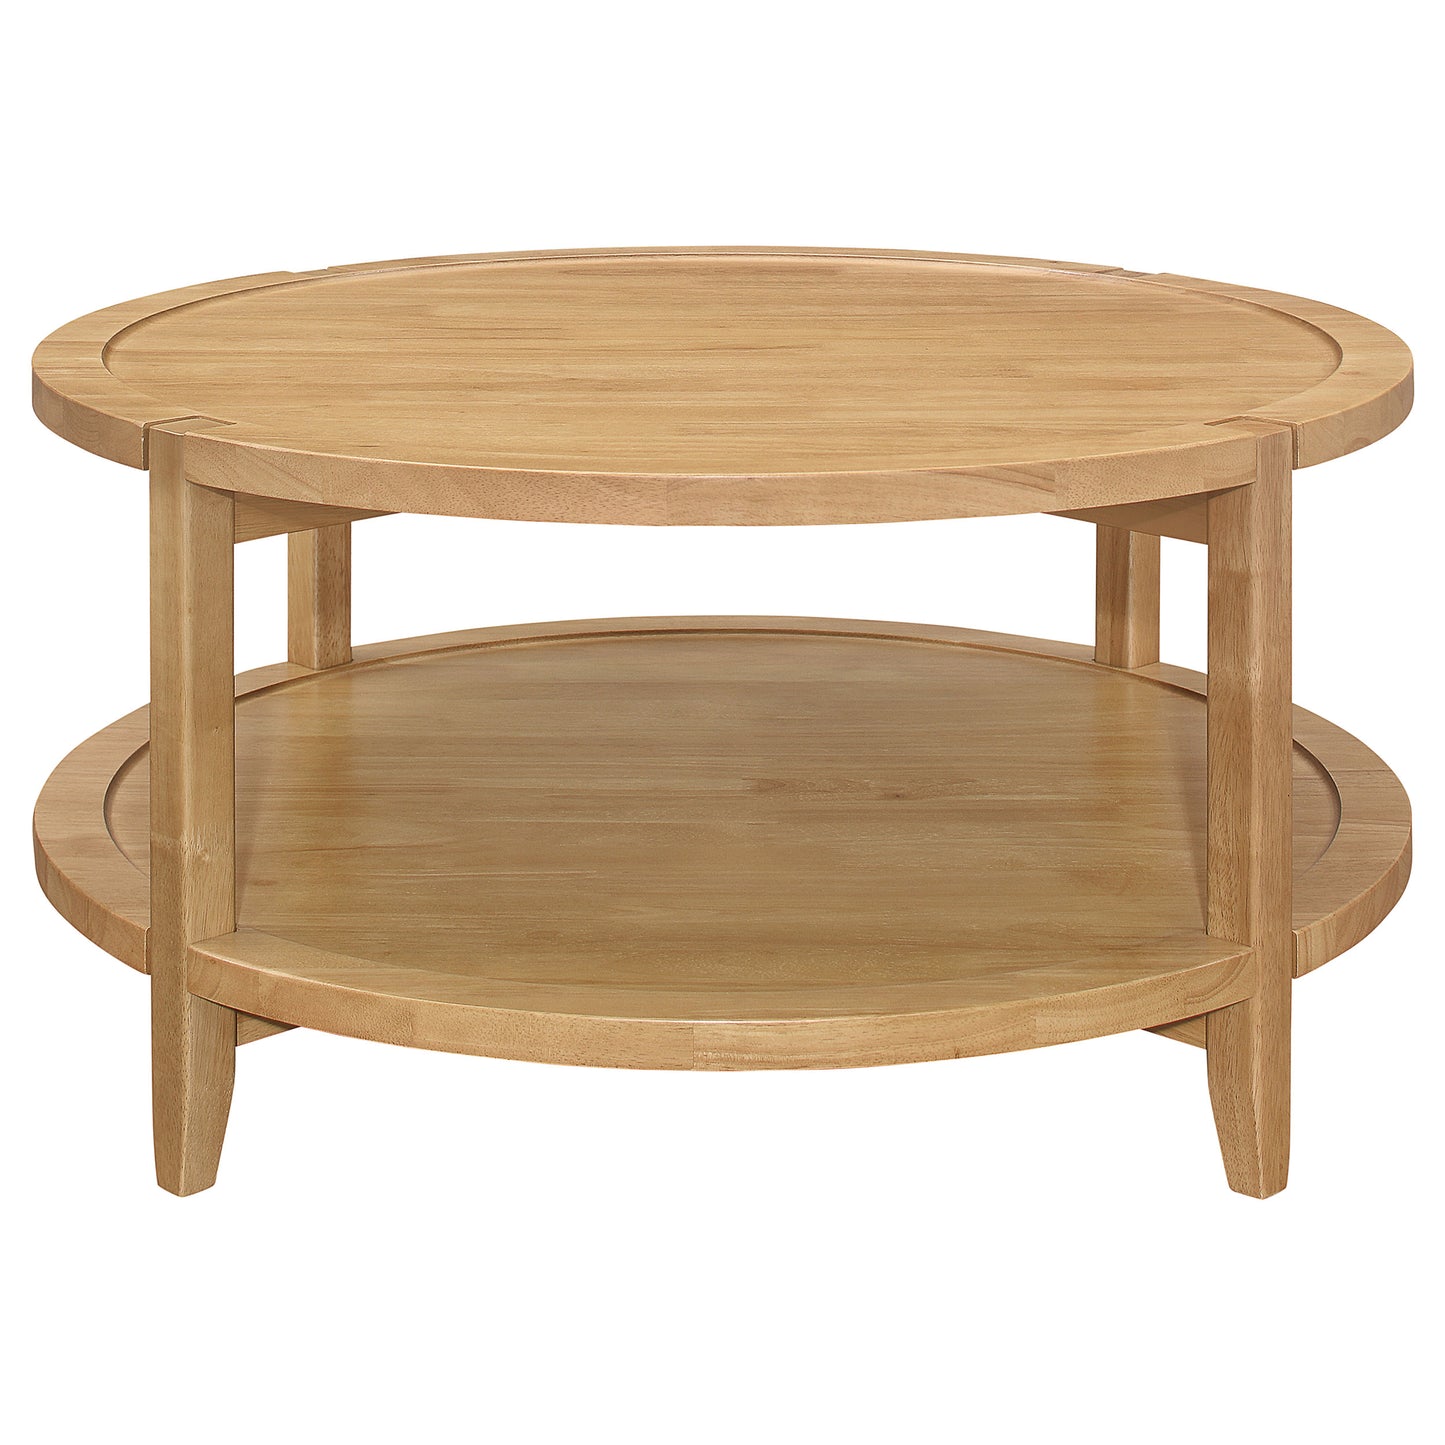 Camillo Round Solid Wood Coffee Table with Shelf Maple Brown